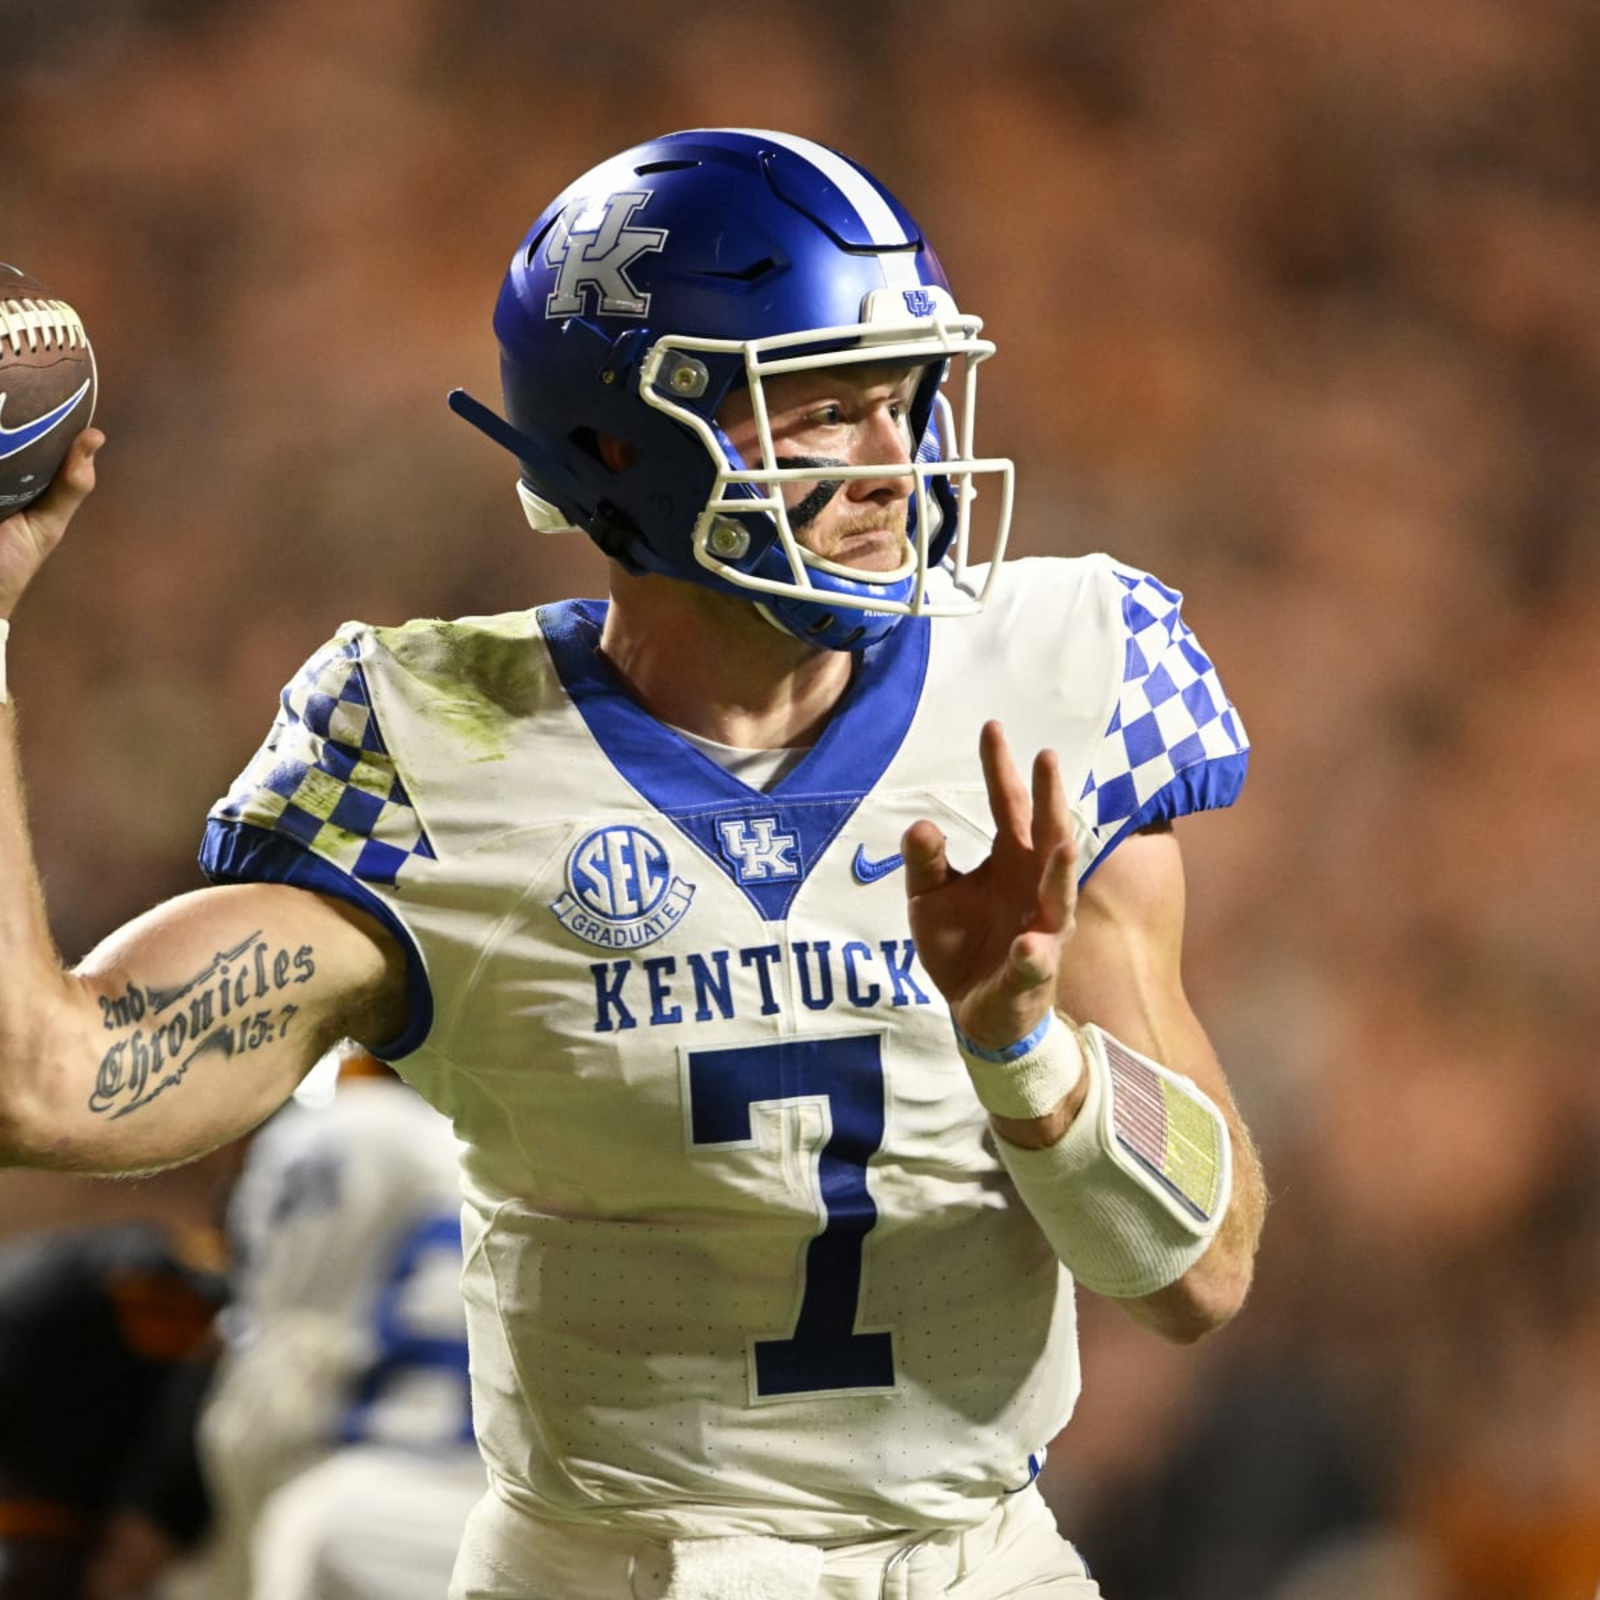 Mel Kiper Has A New No. 1 Quarterback For 2022 NFL Draft - The Spun: What's  Trending In The Sports World Today